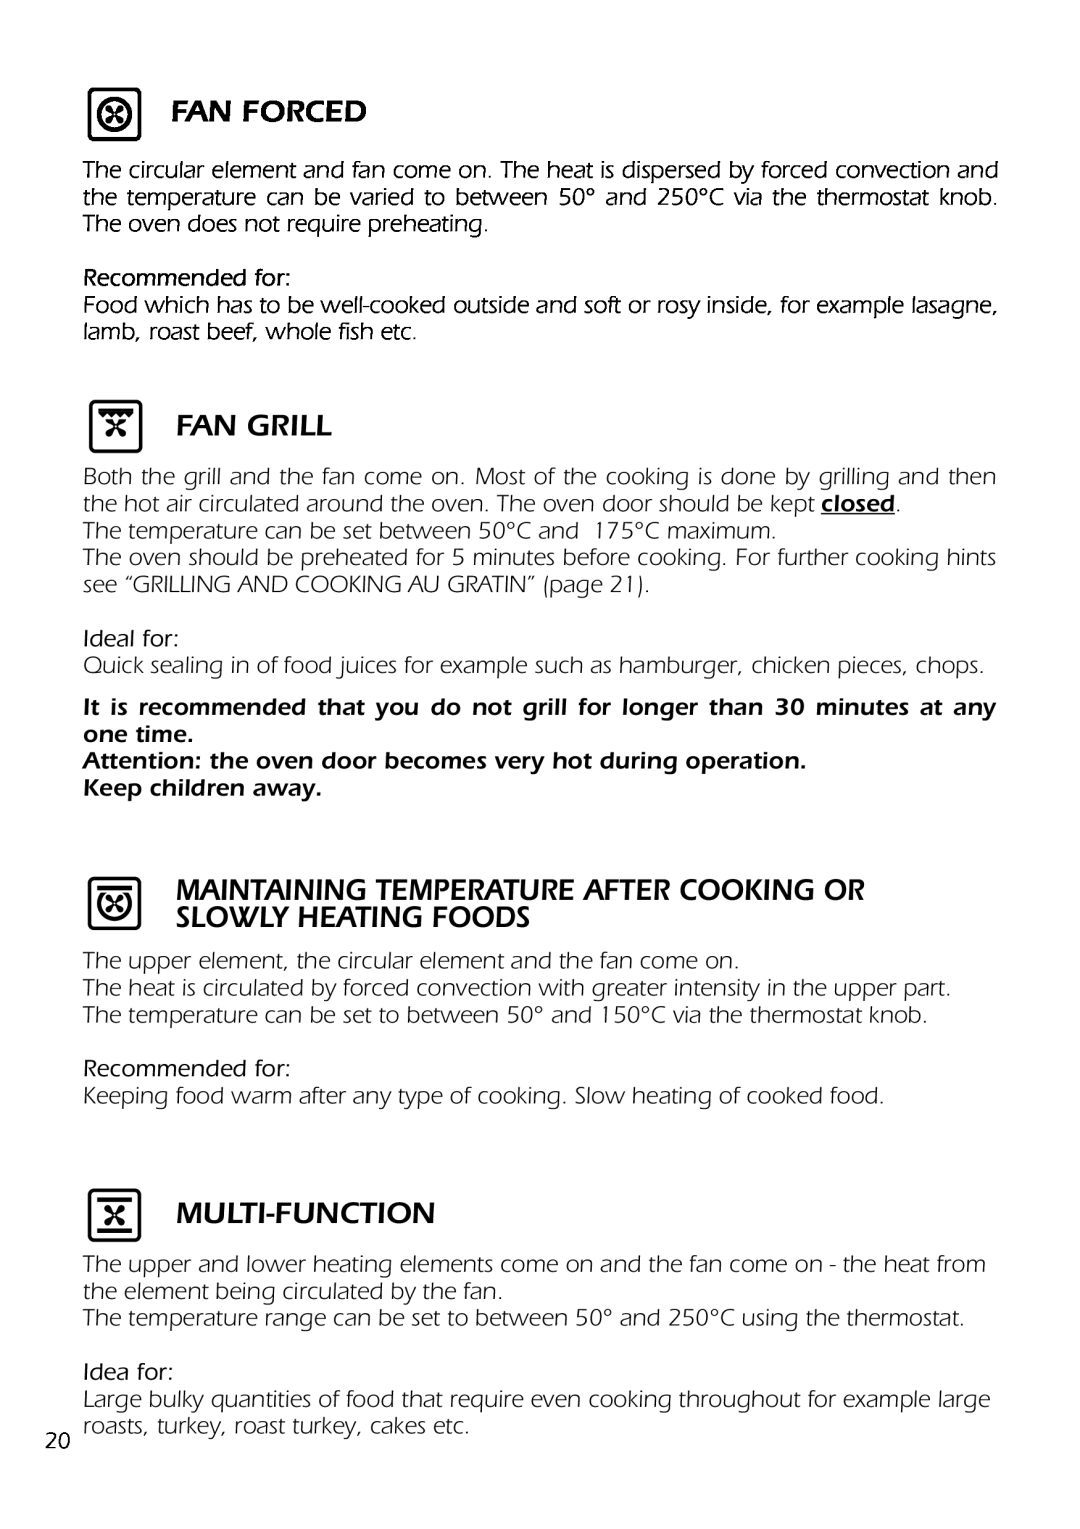 DeLonghi D 61 E Fan Forced, Fan Grill, Maintaining Temperature After Cooking Or, Slowly Heating Foods, Multi-Function 